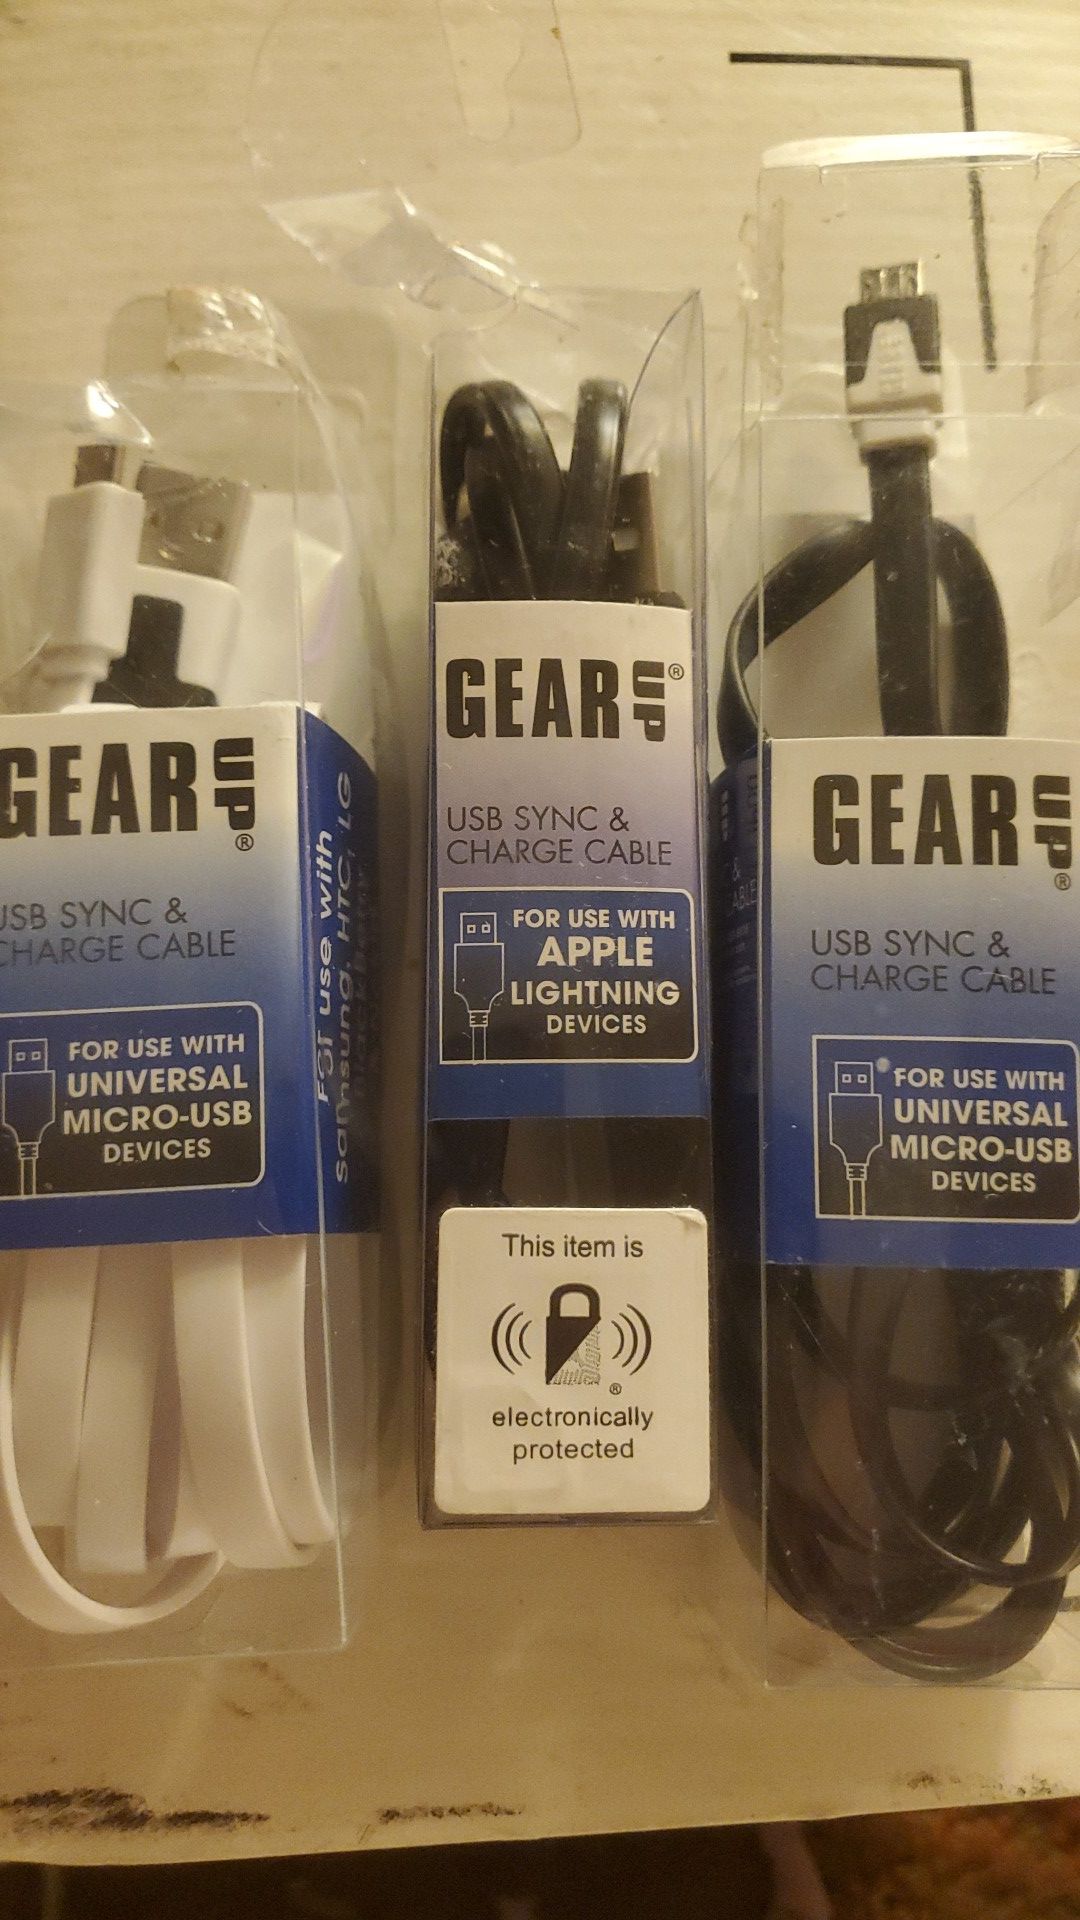 GEAR UP USB sync & charge cable